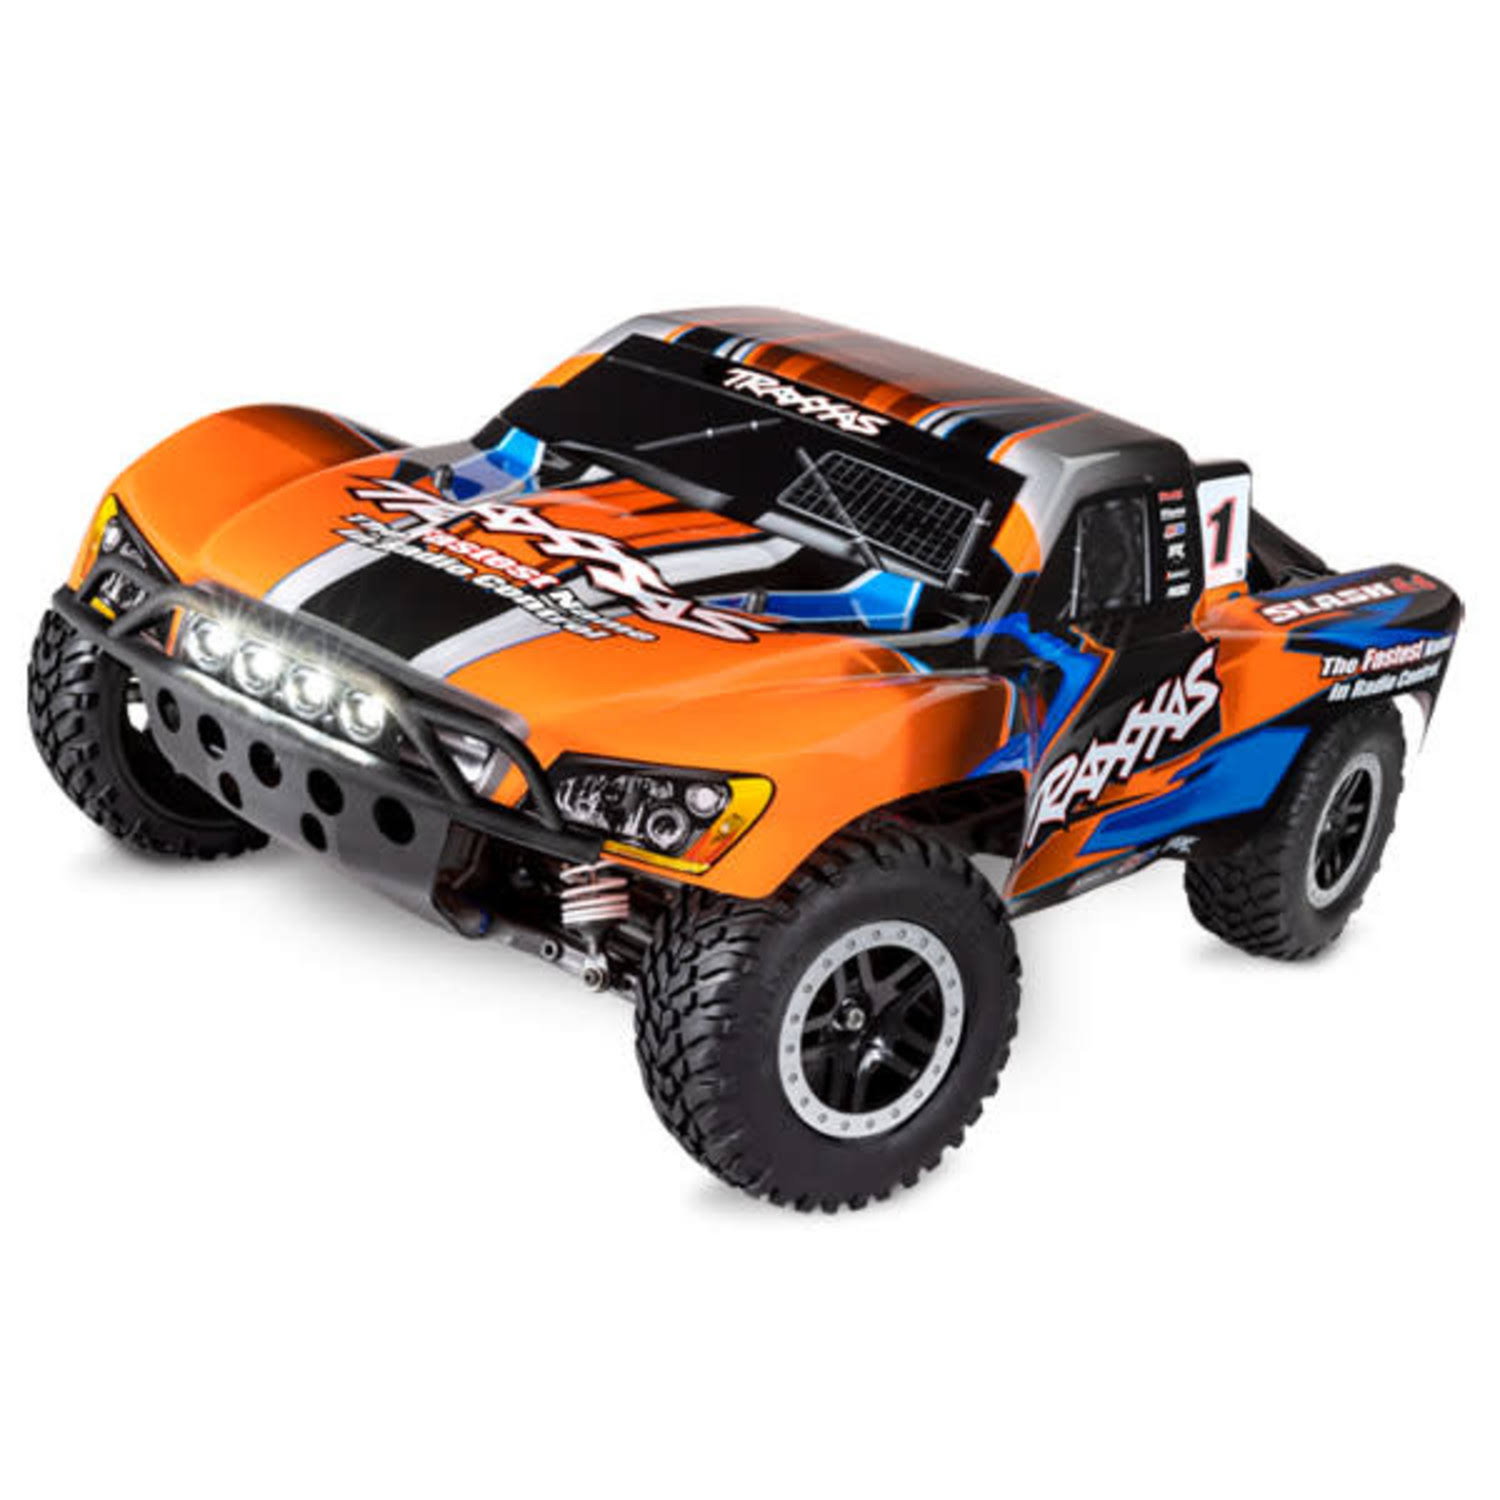 Traxxas Slash 4X4 1/10 4WD XL-5 RTR Short Course Truck No battery or Charger. Orange